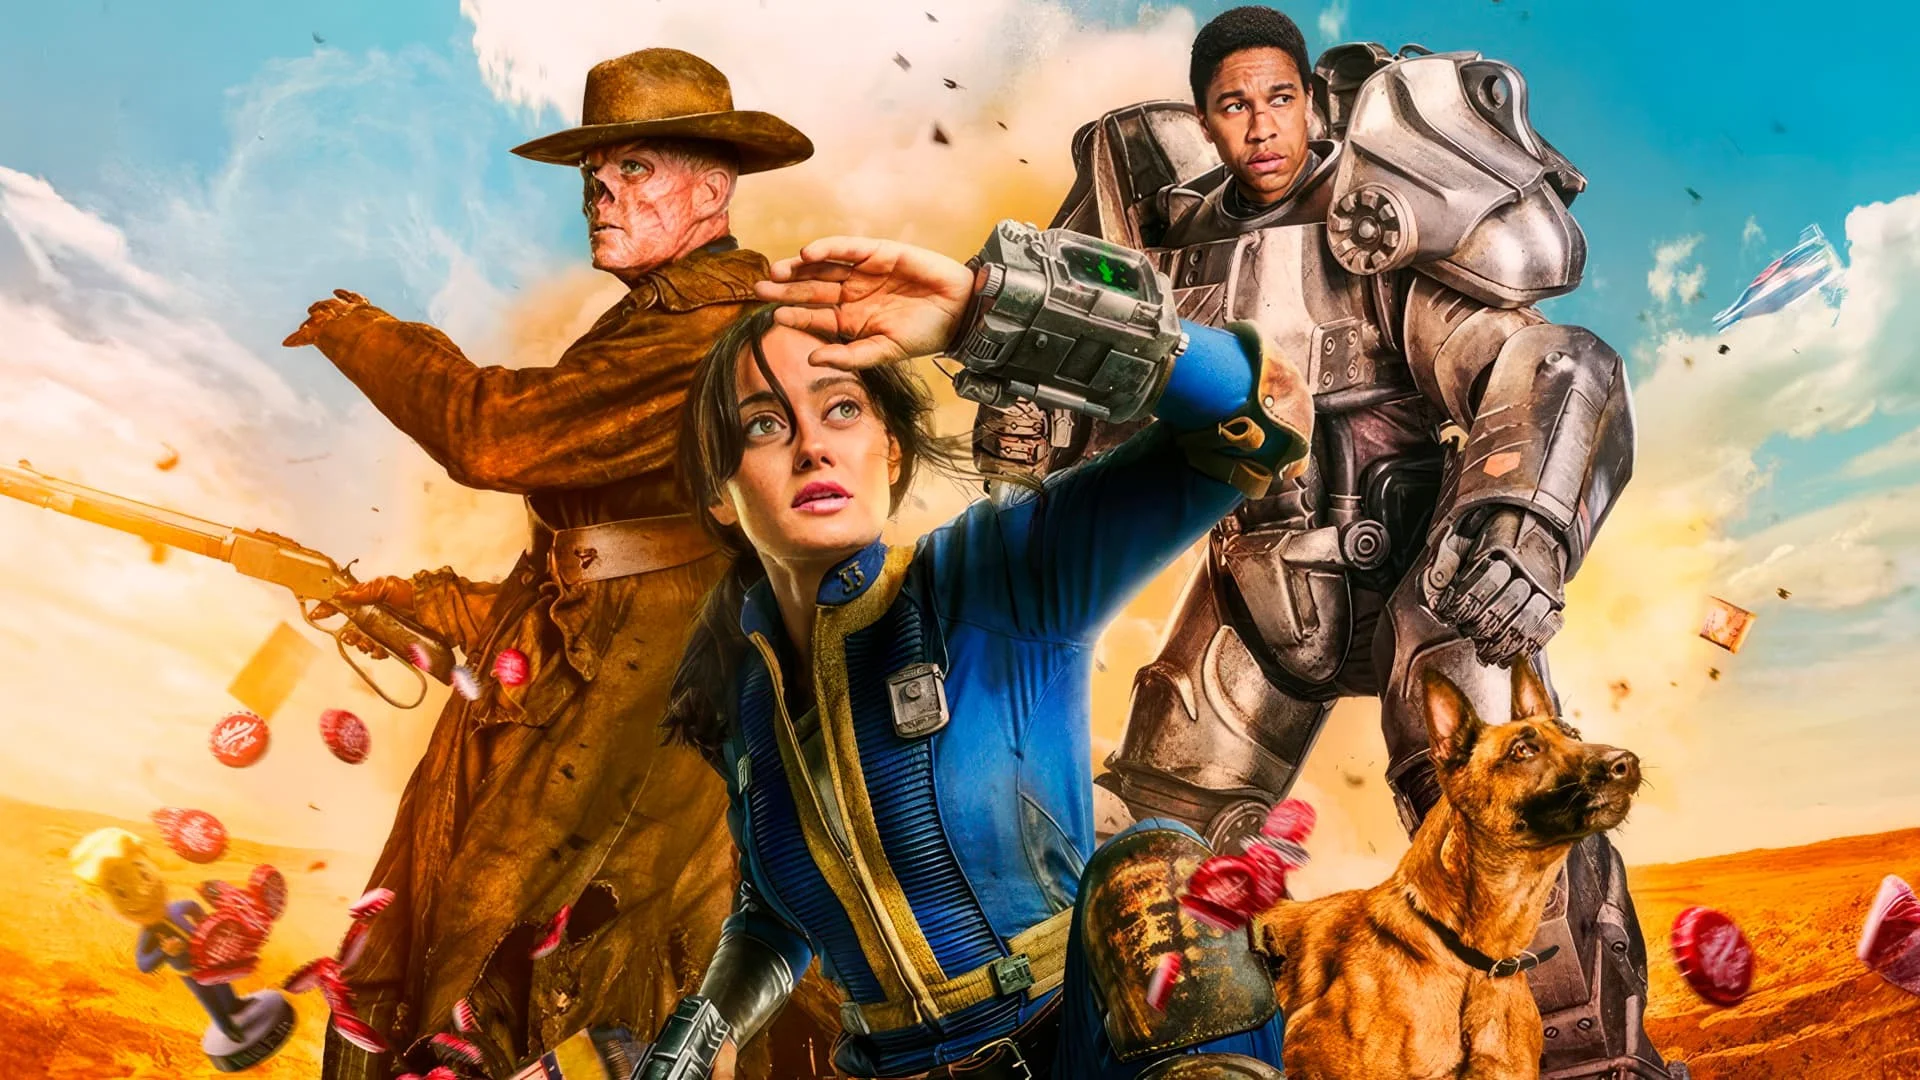 The Fallout series has received a new release date and has been renewed for a second season